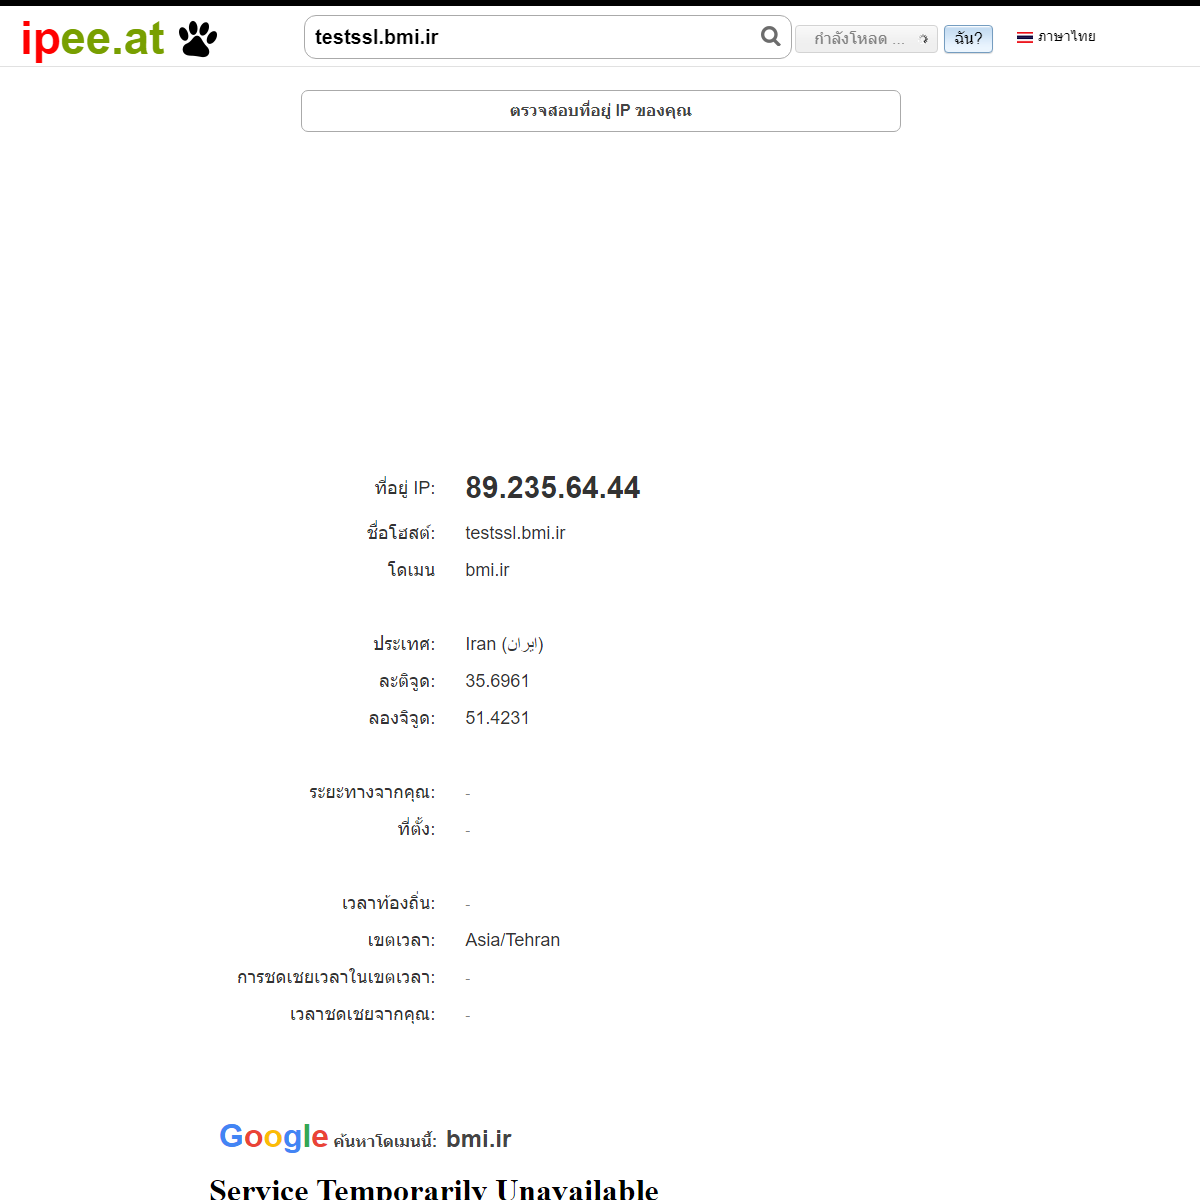 A complete backup of https://th.ipee.at/testssl.bmi.ir